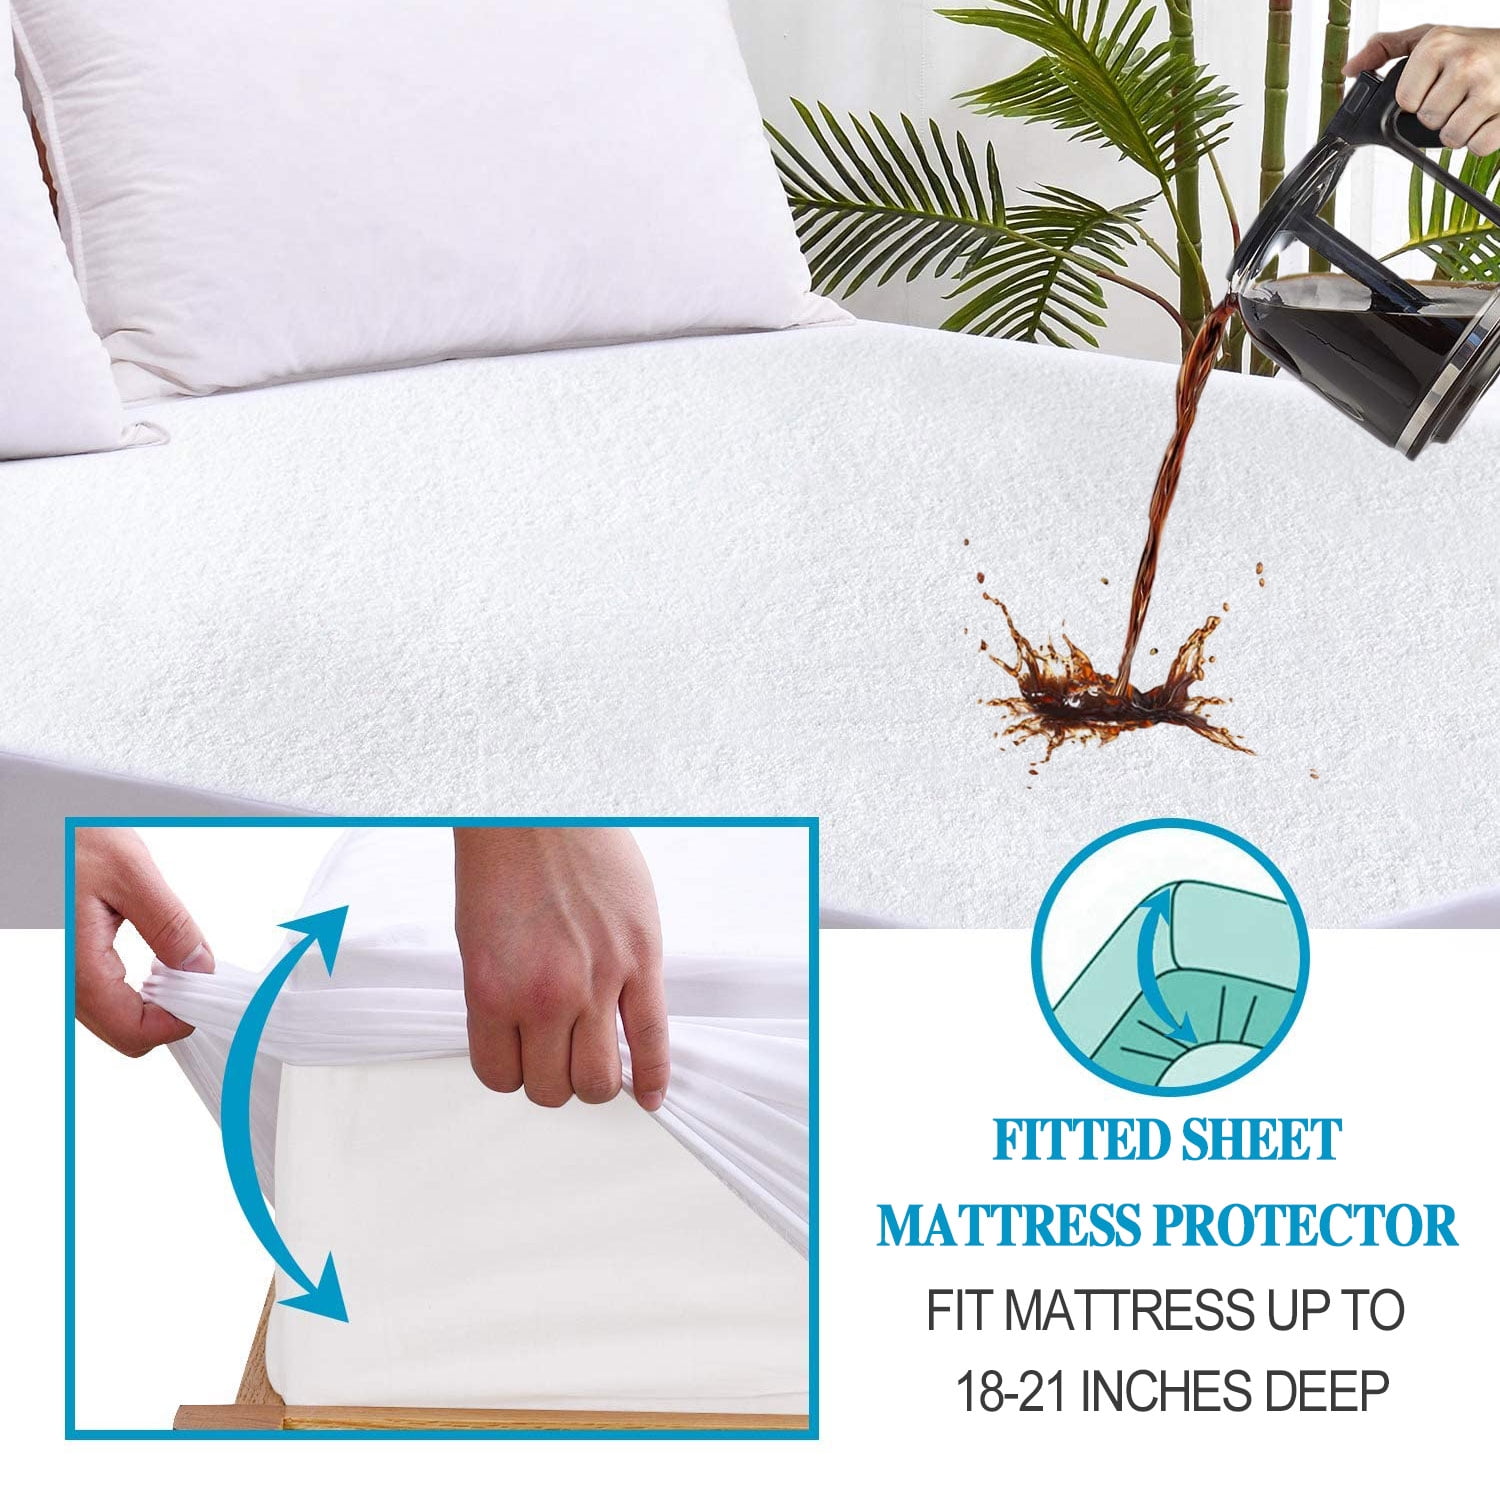 Details about   BAMBOO MATTRESS PROTECTOR WATERPROOF EXTRA SOFT HYPOALLERGENIC FITTED BED COVER 